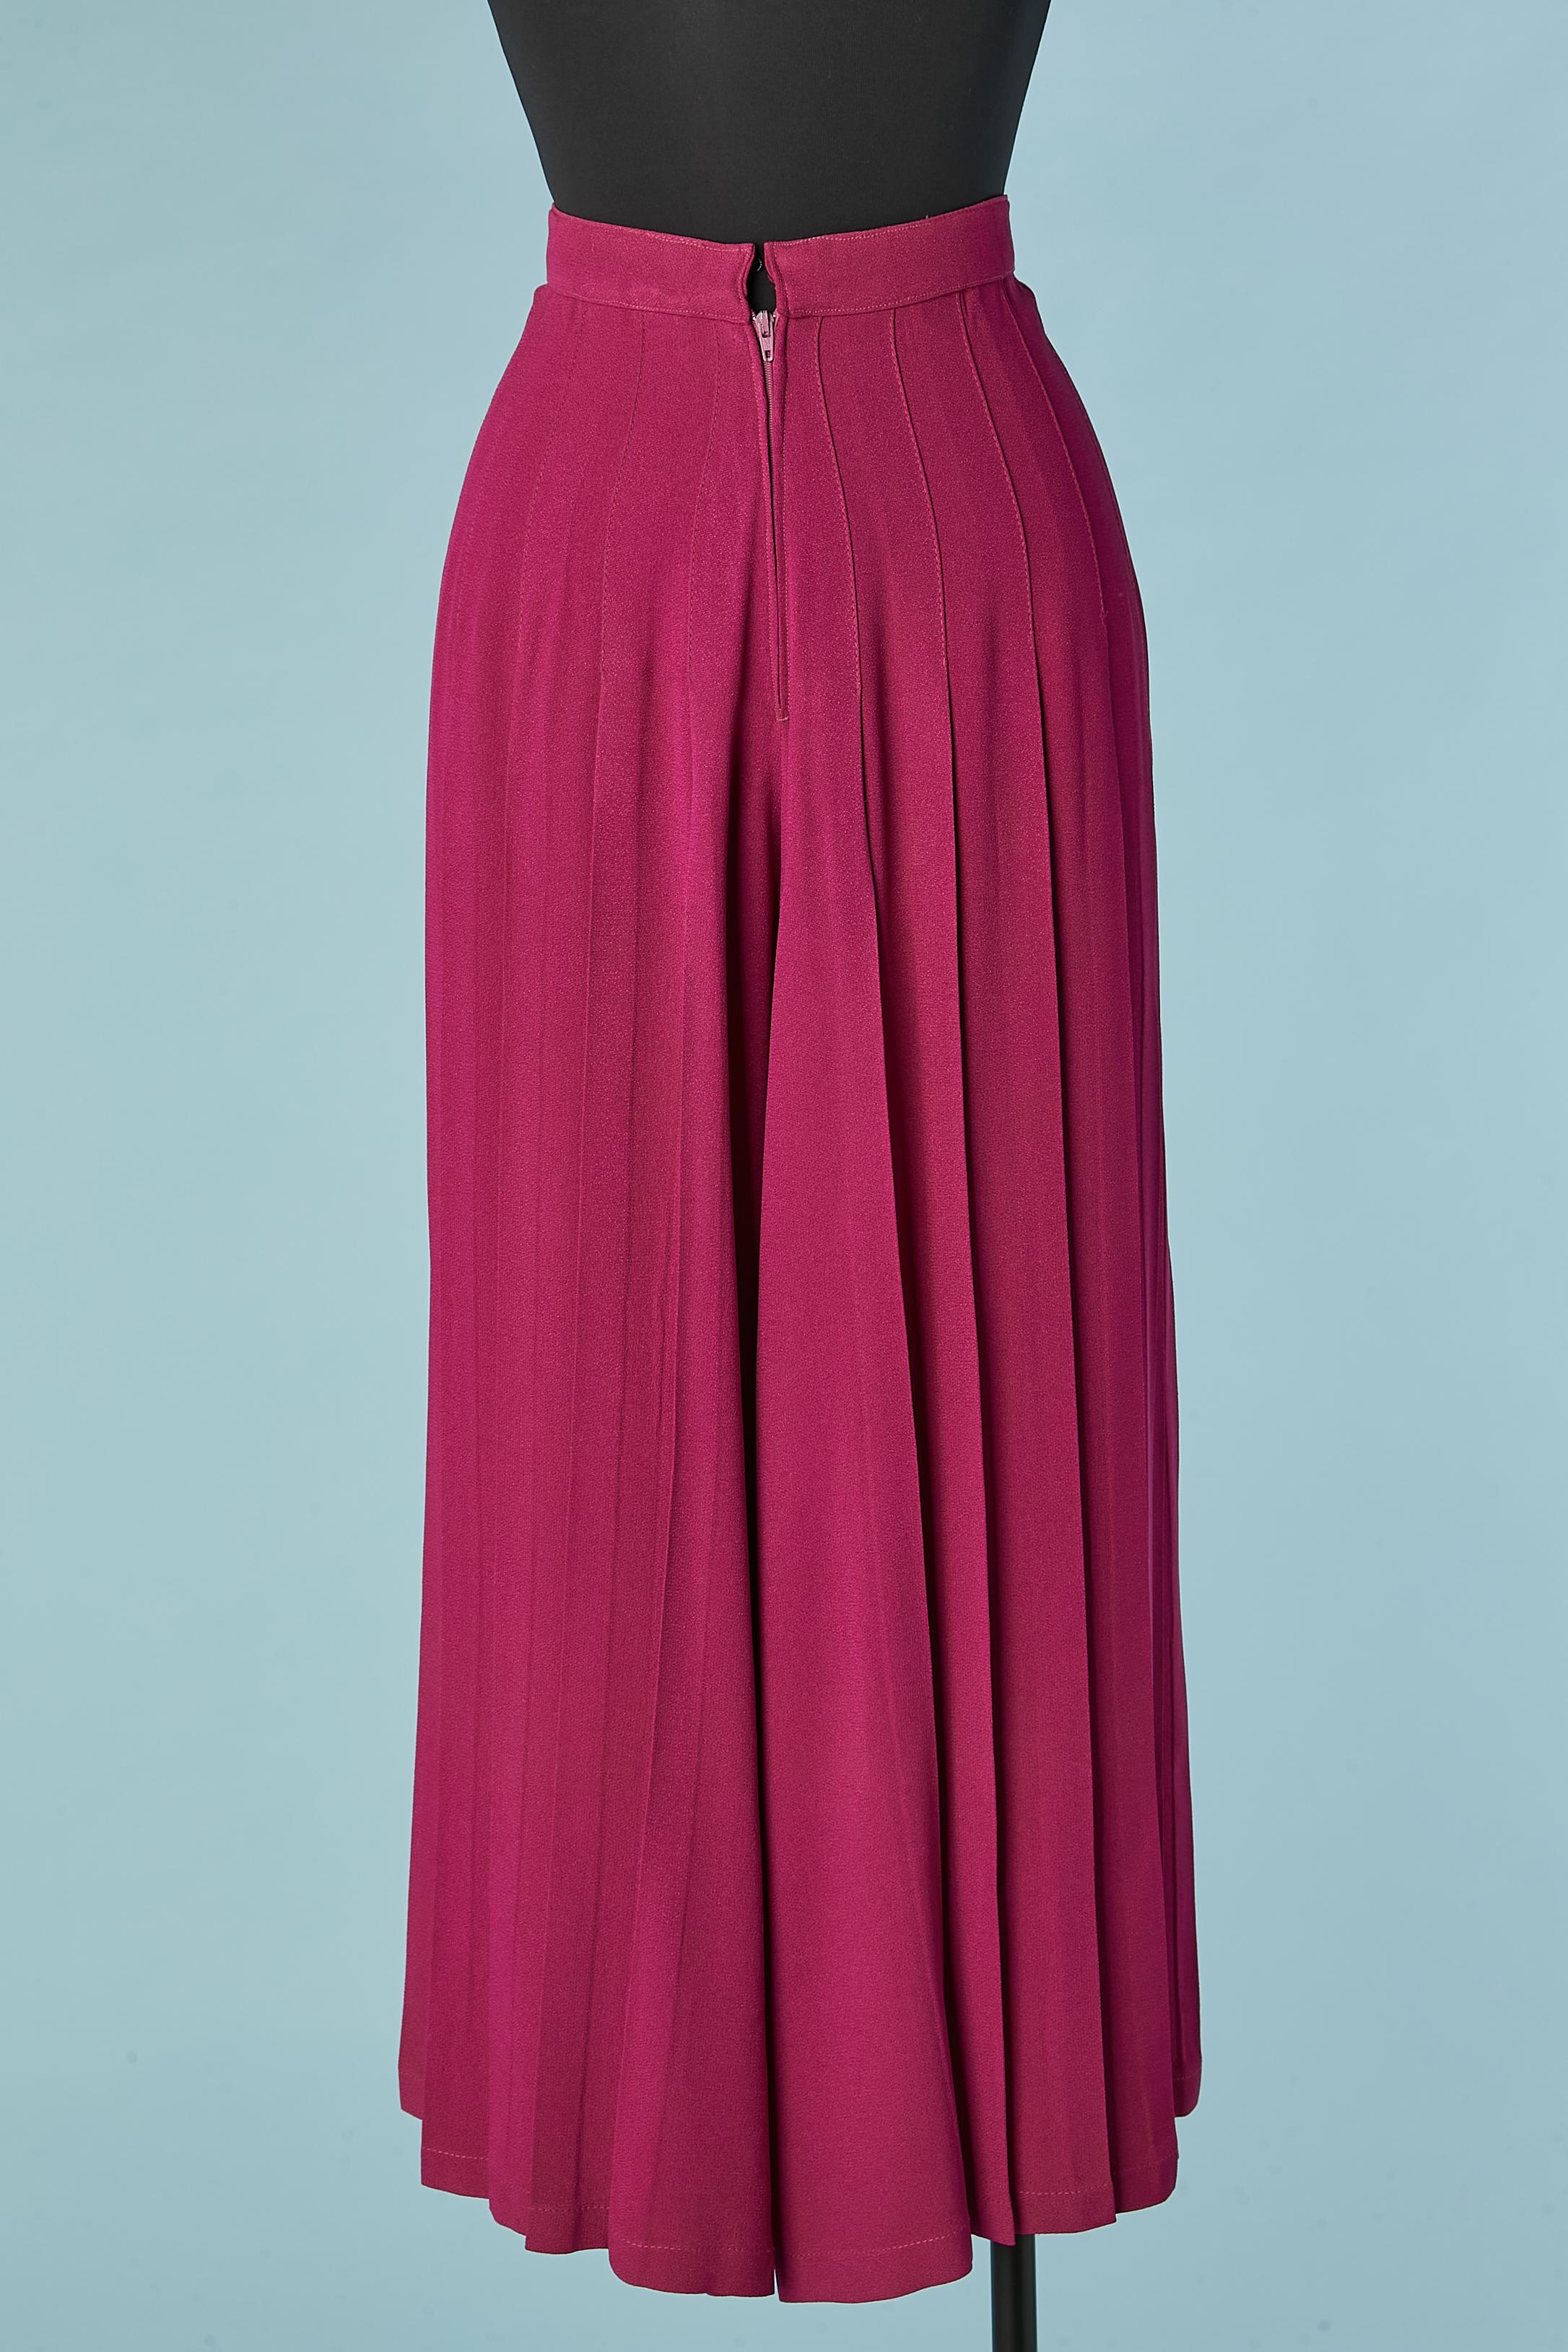 Pleated crepe fushia divided skirt  with zip and hook&eye closure in the middle front. 
Fabric composition: acetate and rayon. 
SIZE M/ L 